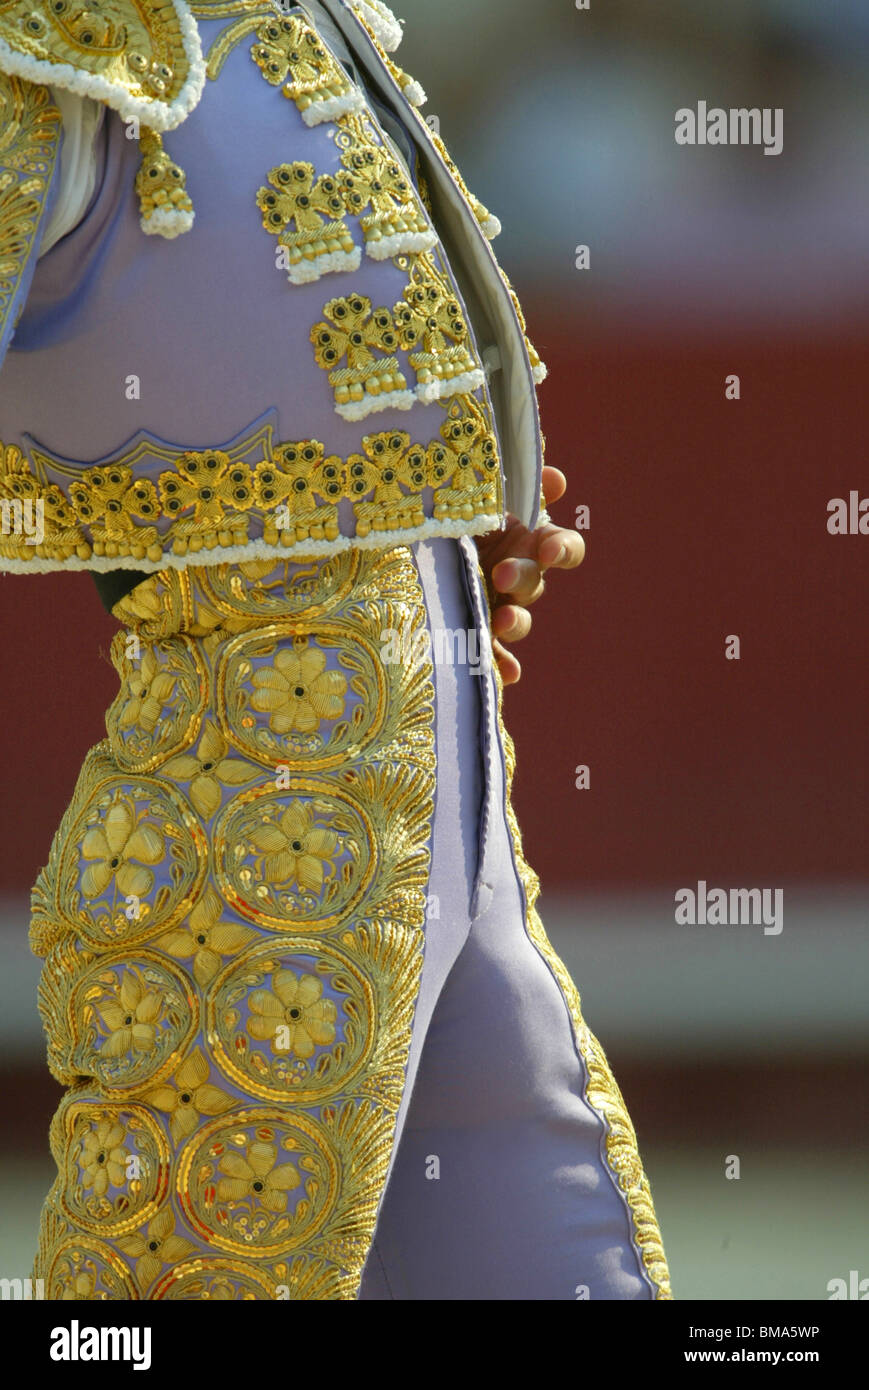 Detail of the suit of a torero during a bullfight Stock Photo